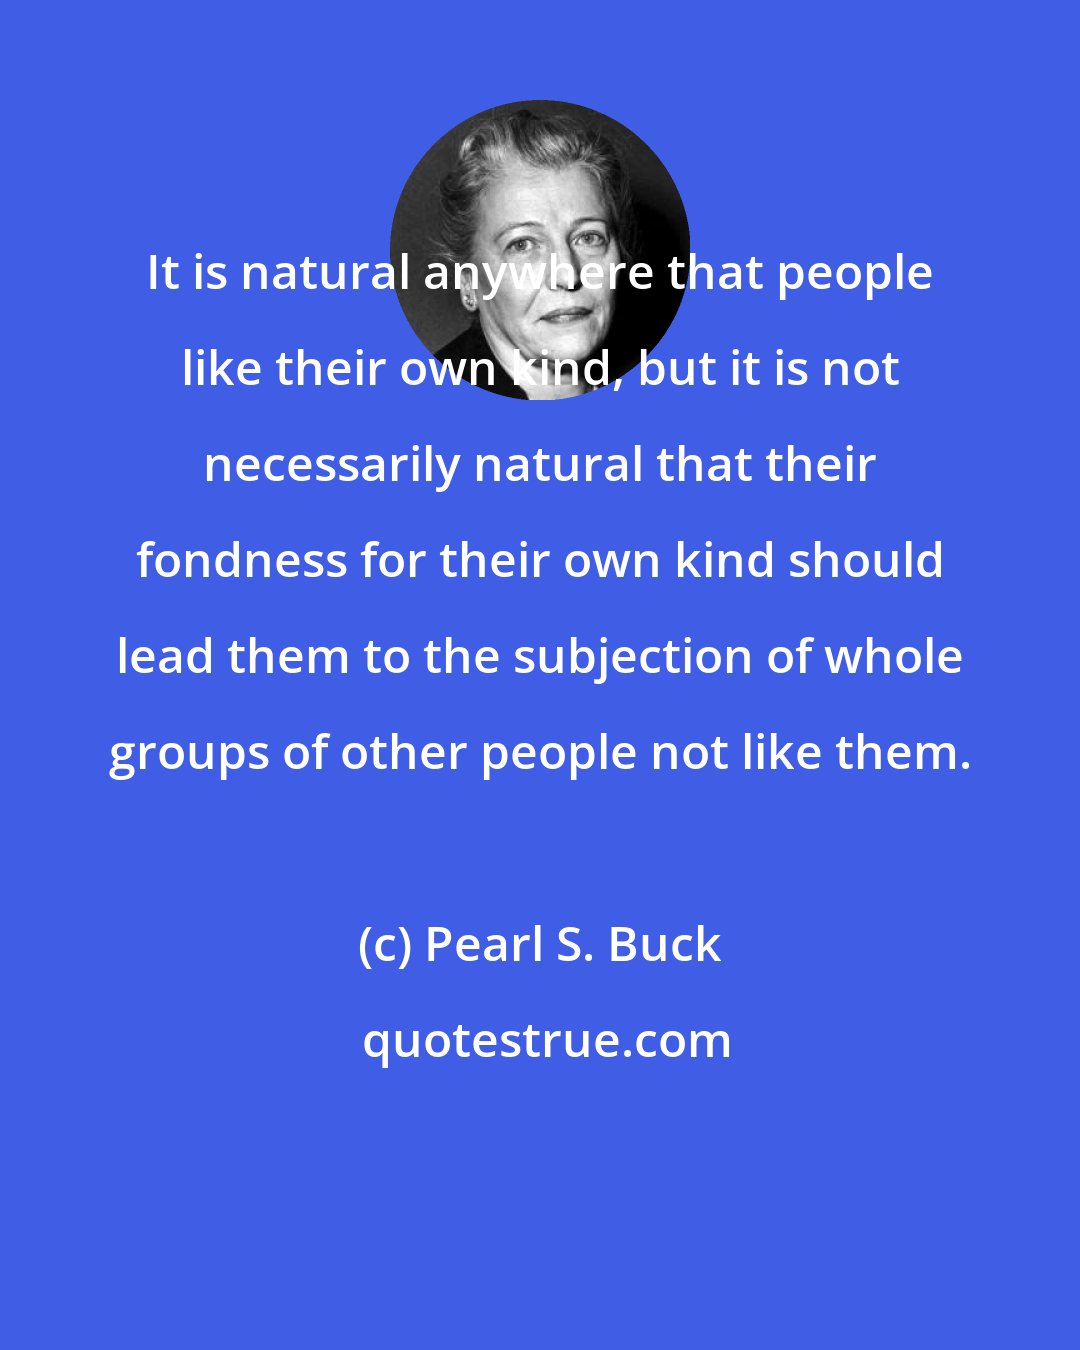 Pearl S. Buck: It is natural anywhere that people like their own kind, but it is not necessarily natural that their fondness for their own kind should lead them to the subjection of whole groups of other people not like them.